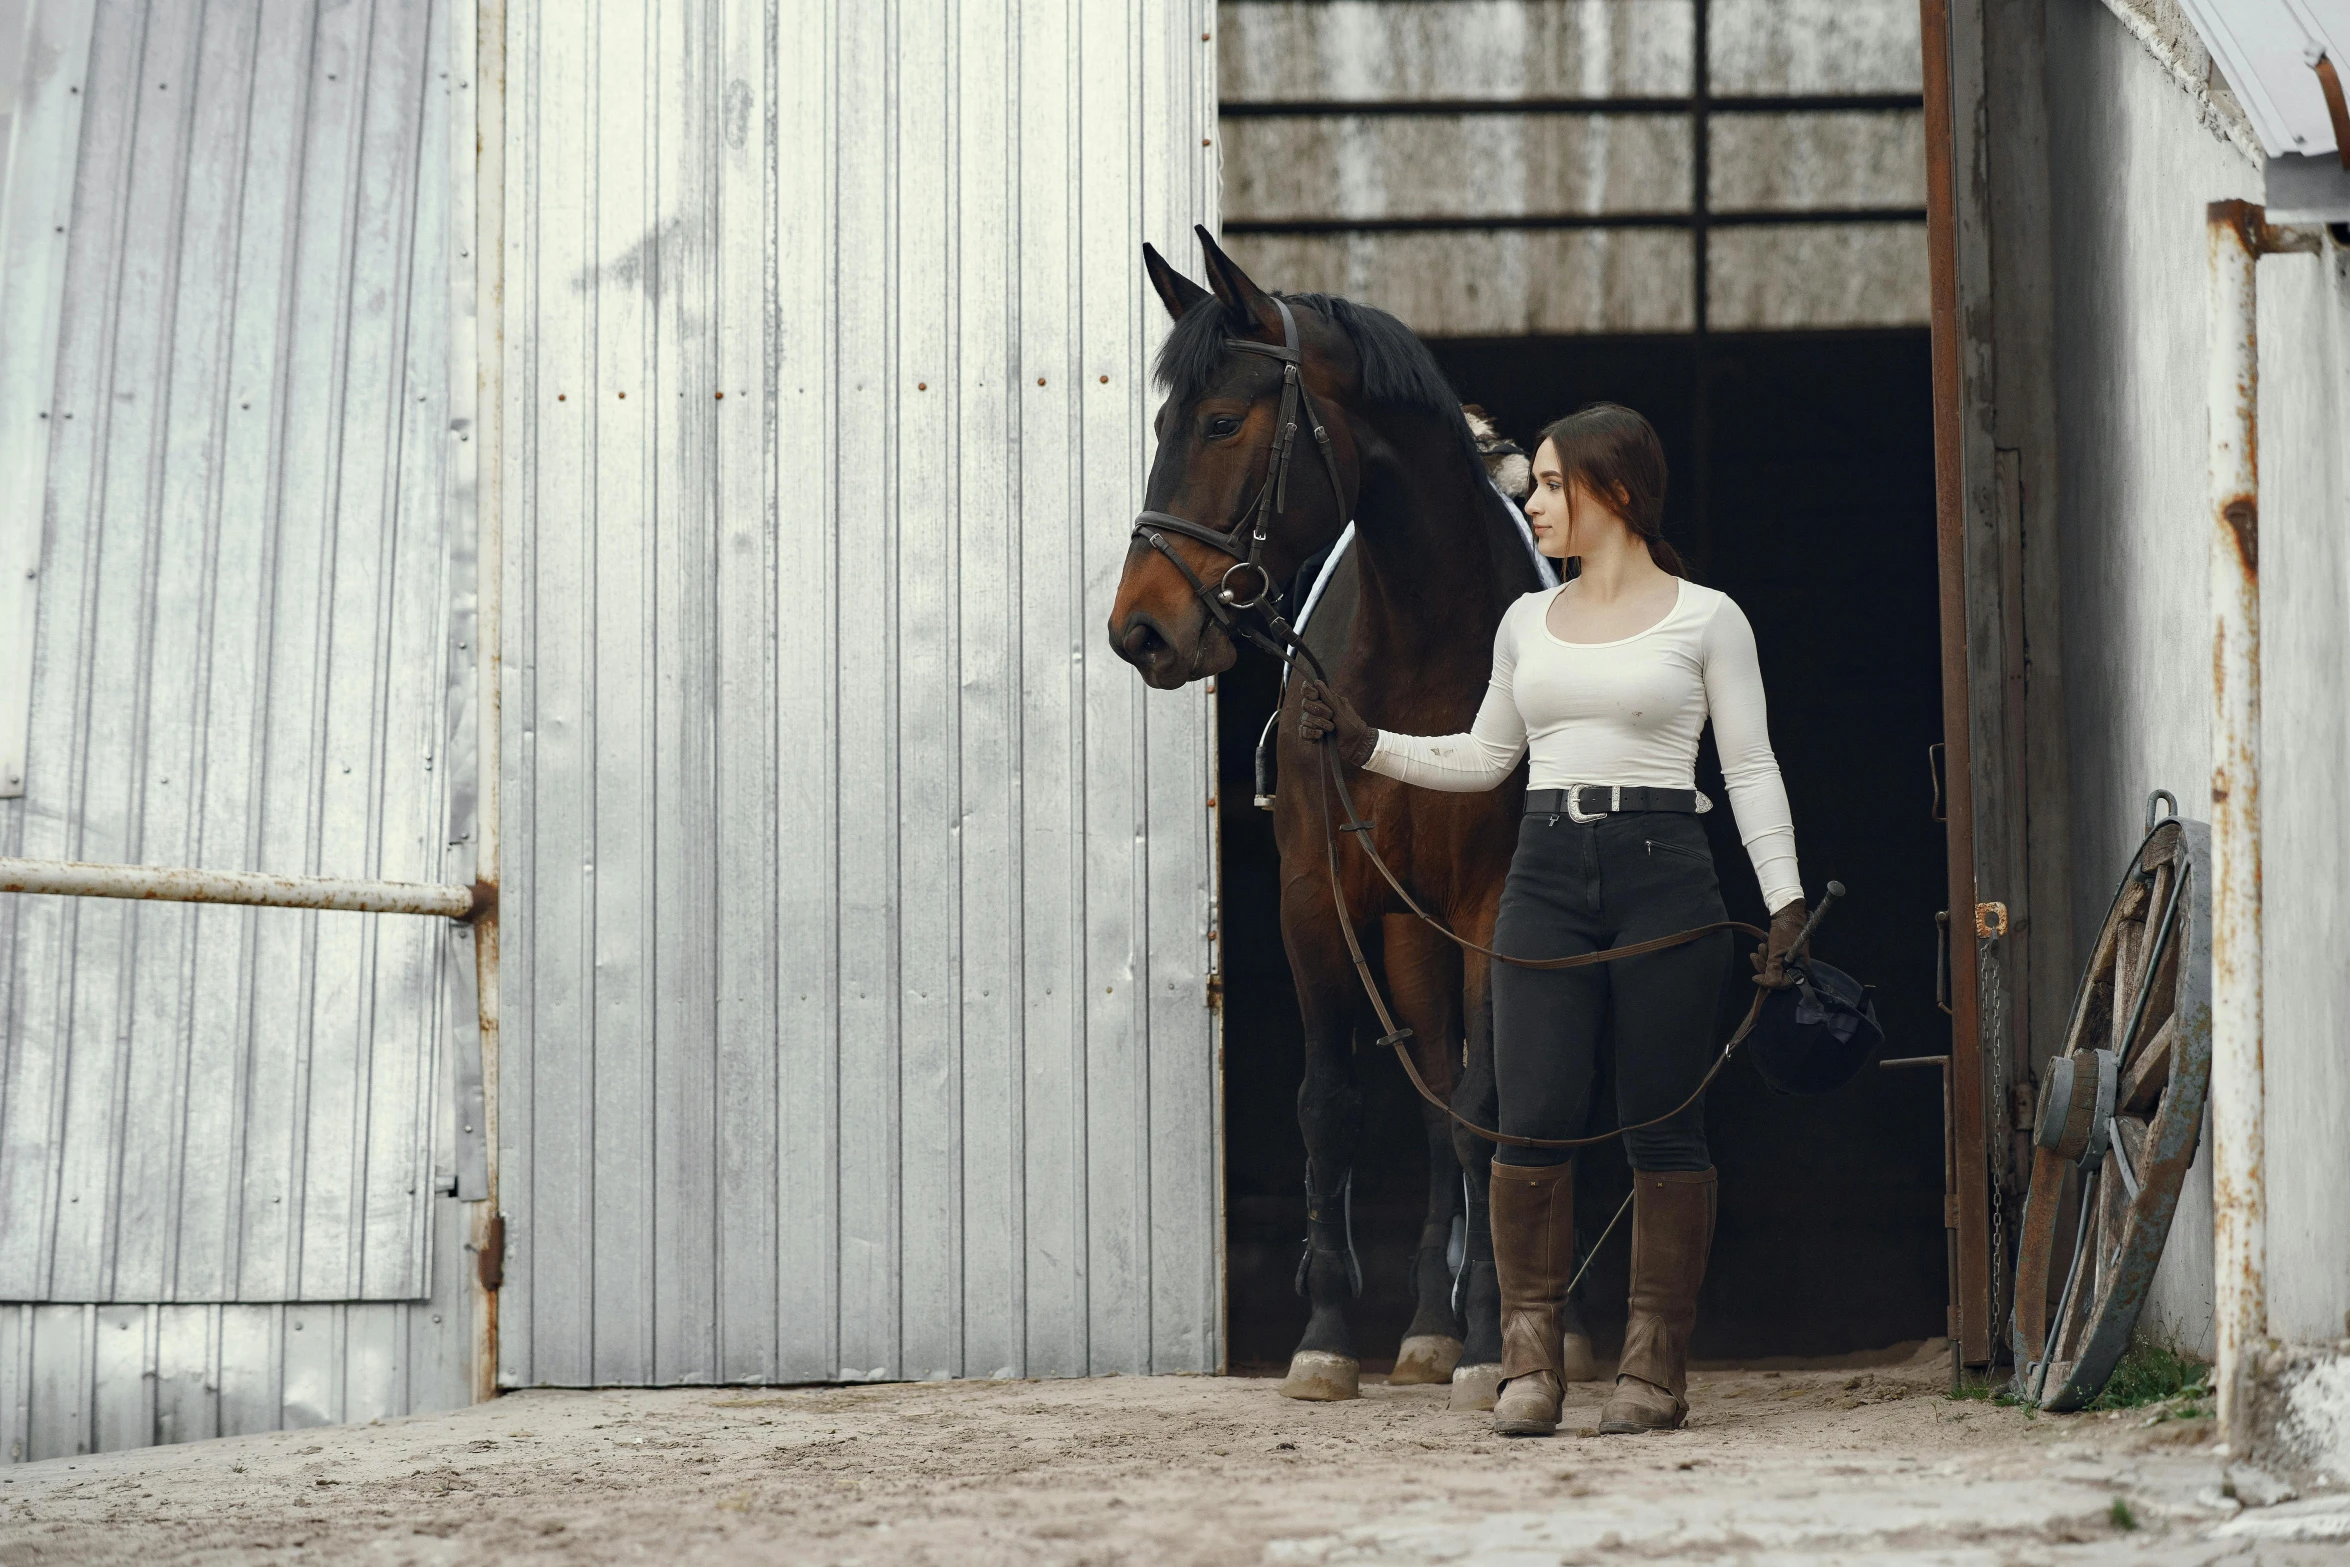 a woman in a white top is standing with a horse